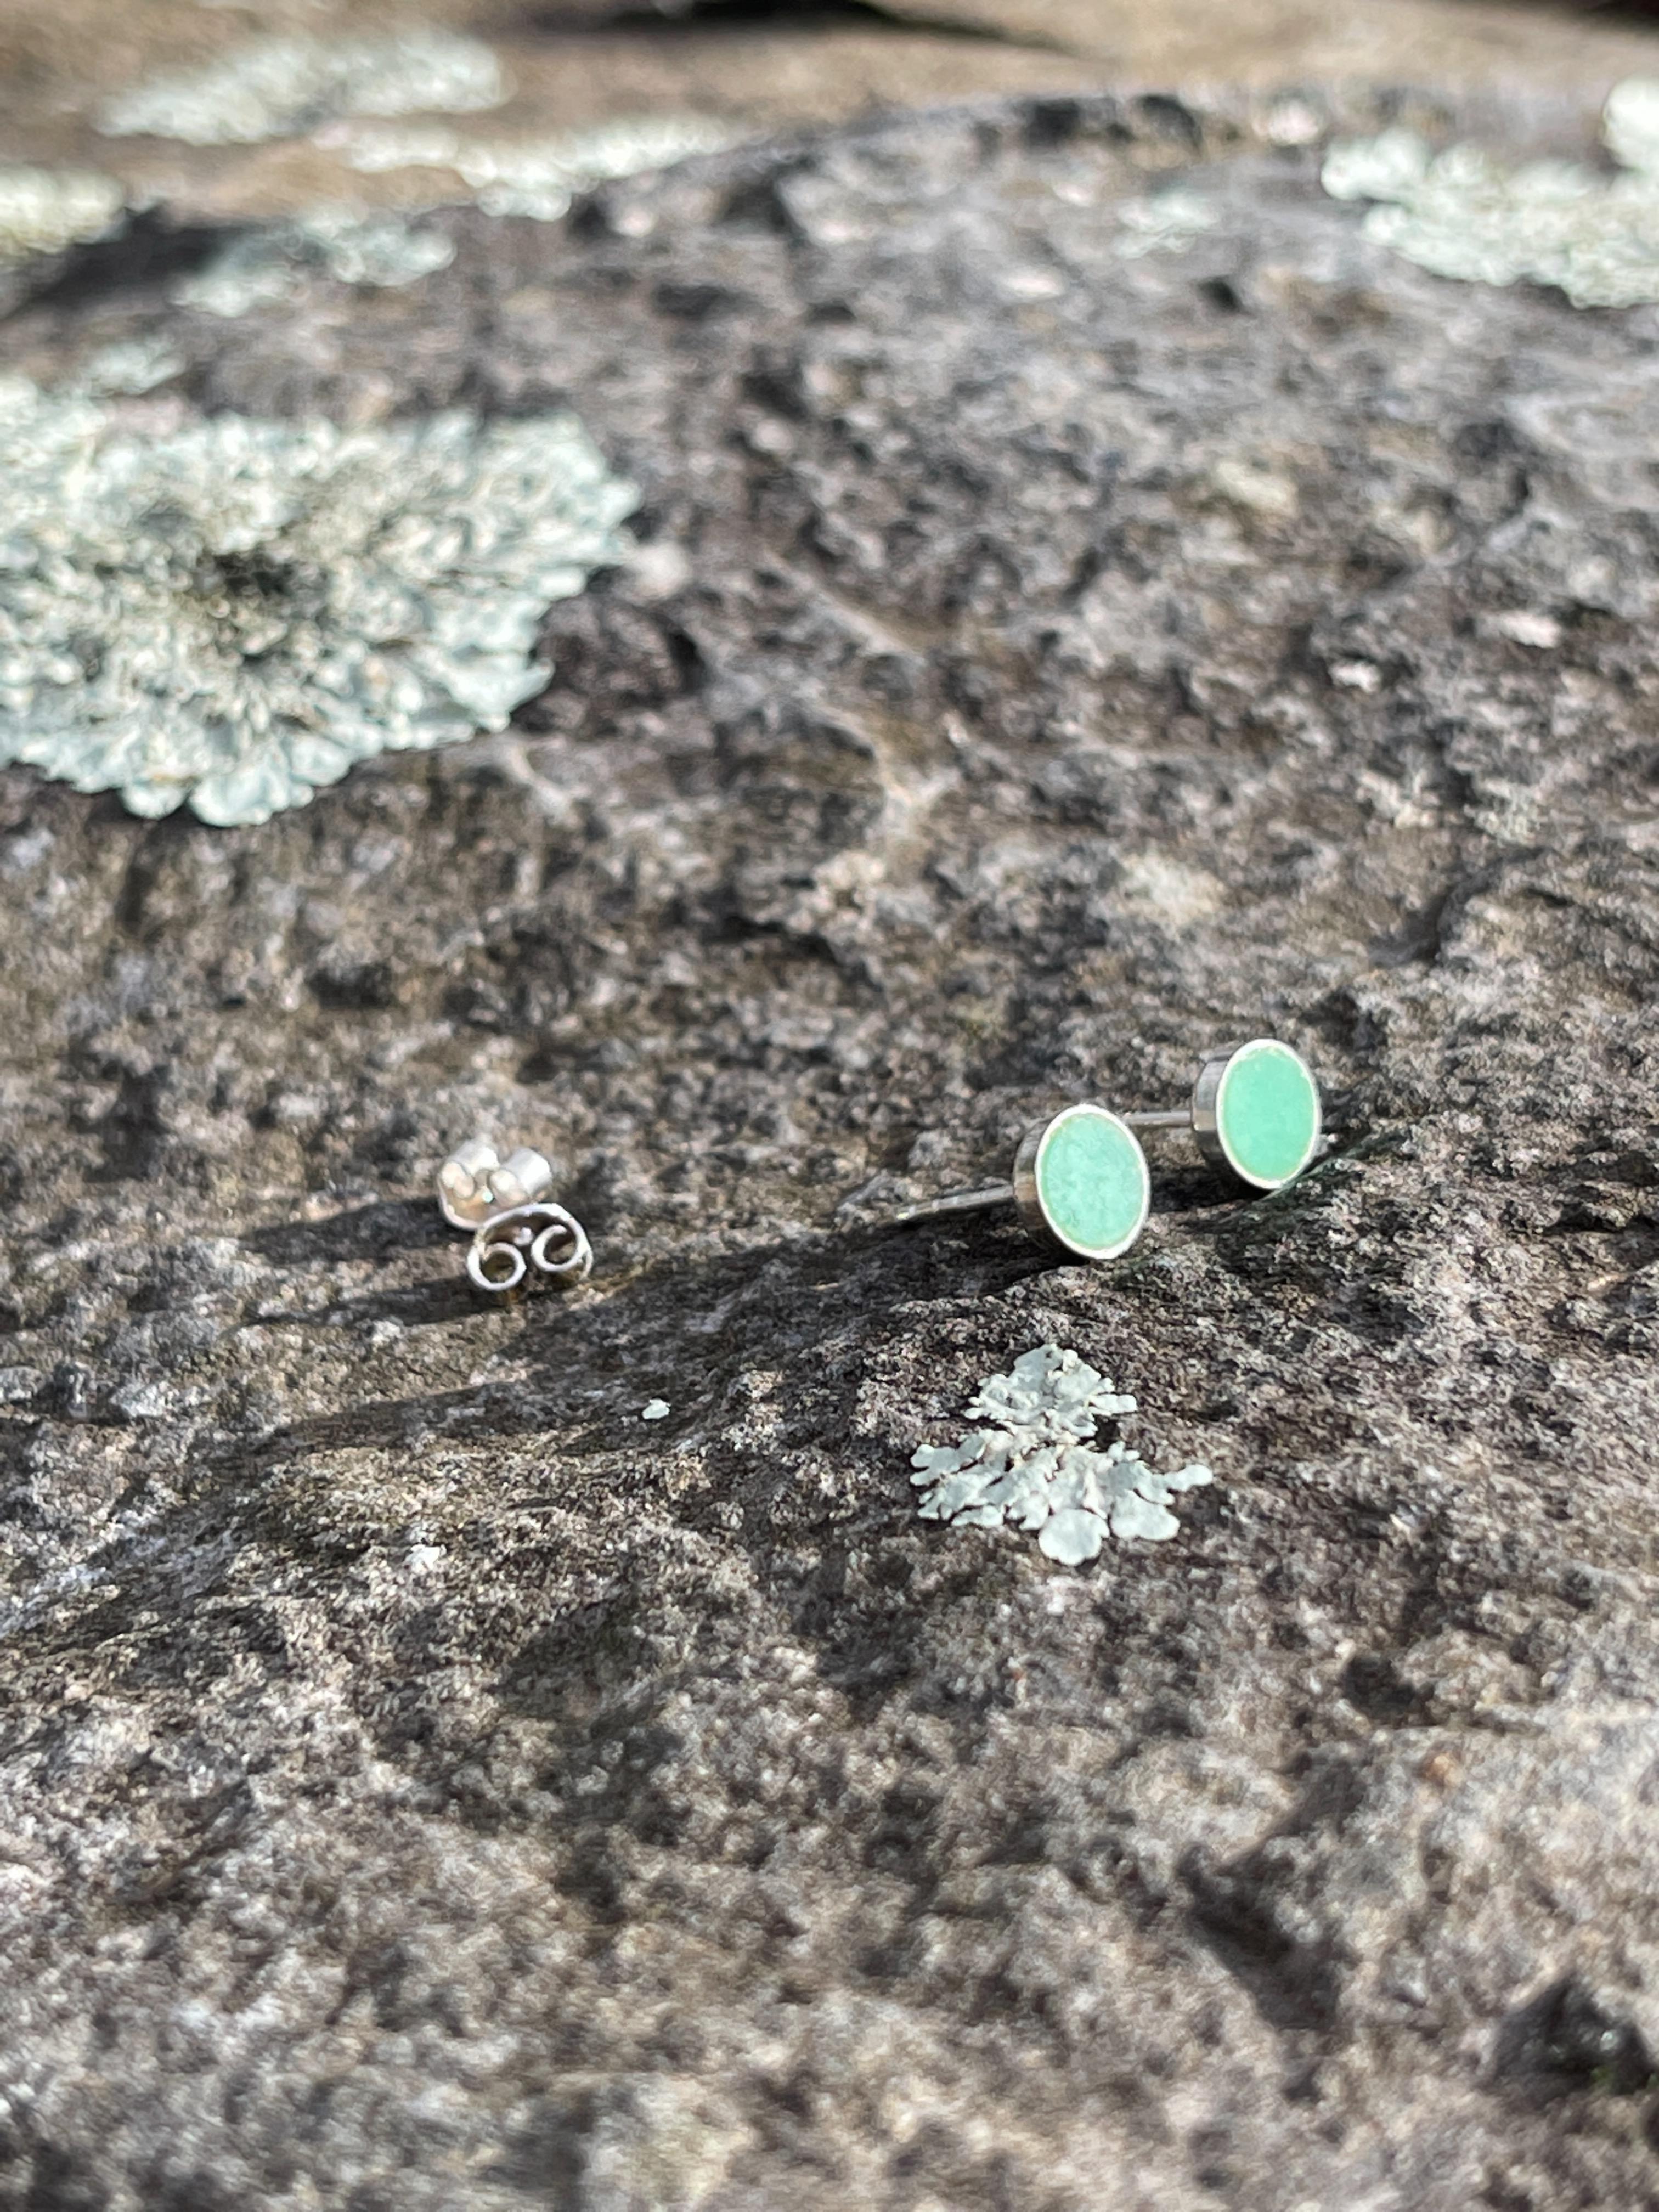 Our silver earrings with the stone of energising turquoise shade is made for you if you love subtle yet eye-catching accessories. Wear it to add a splash of colour to any of your outfits.
The earrings are adorned with chrysoprase, stone that